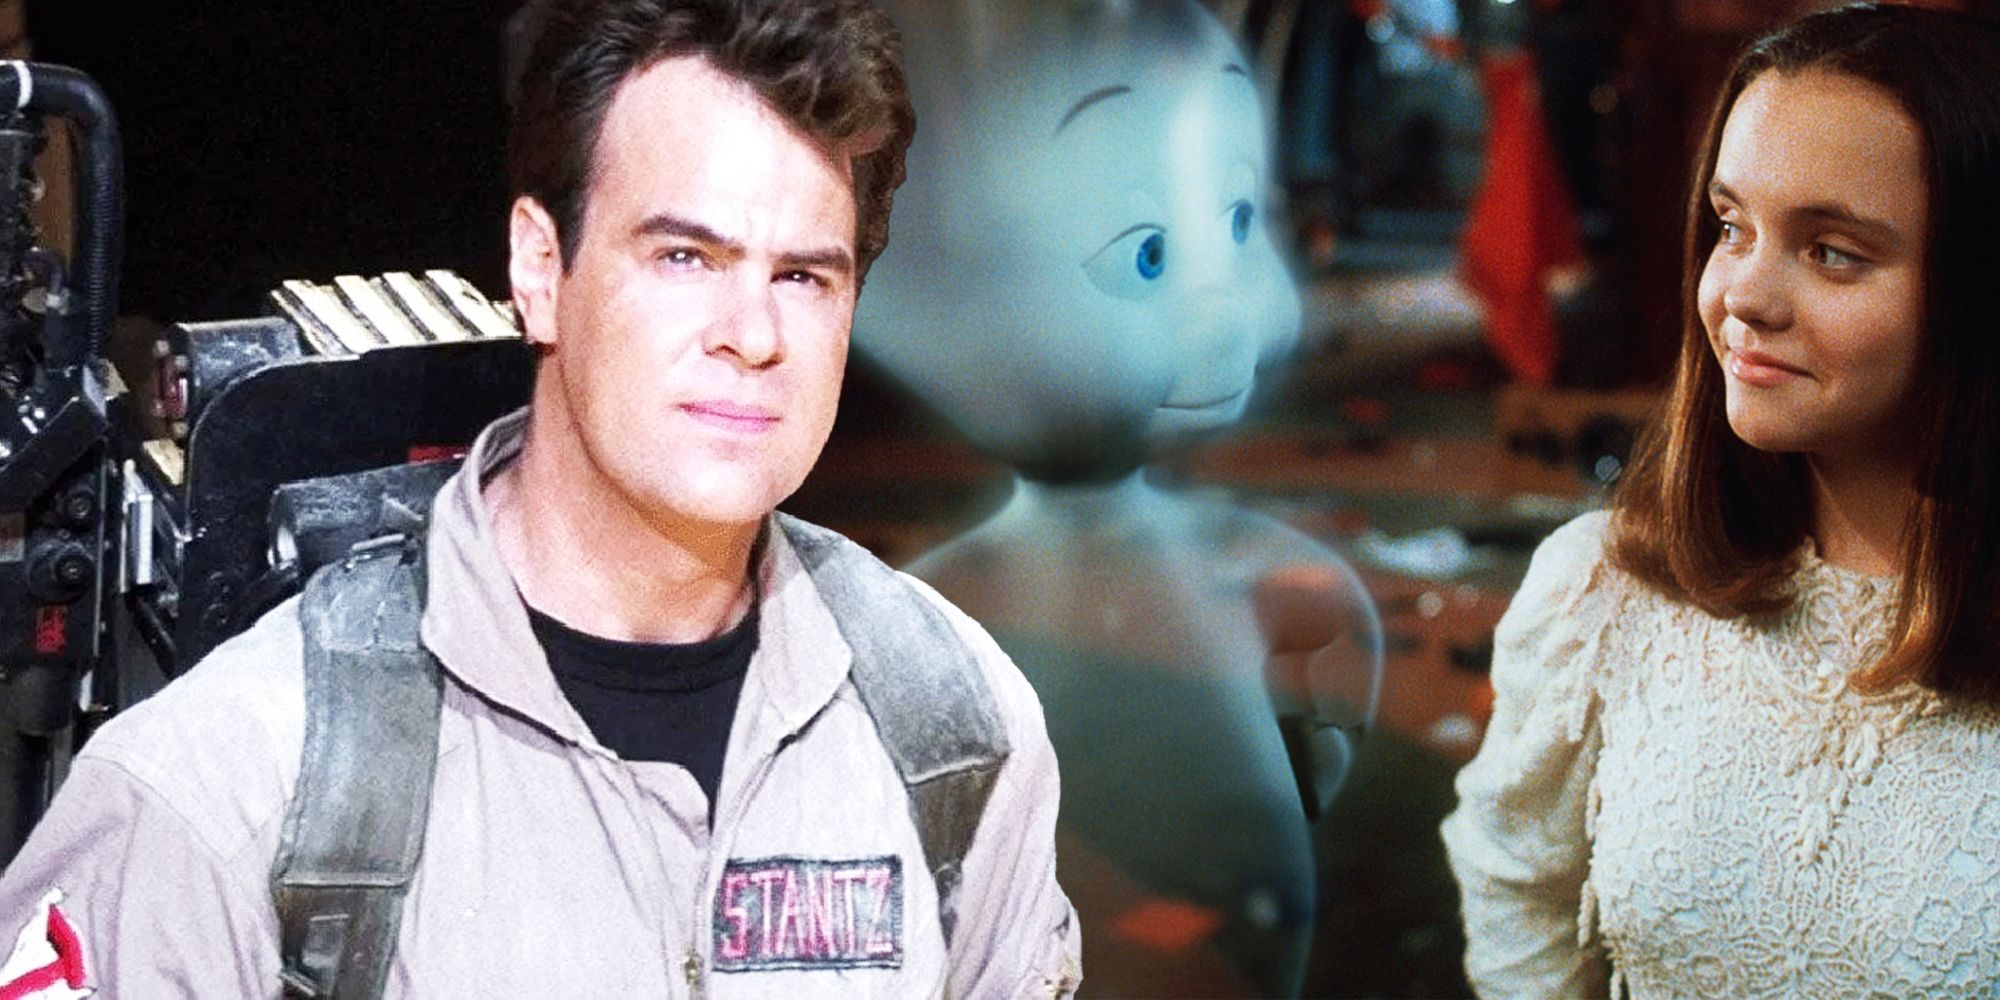 Ghostbusters Stantz and the Casper movie